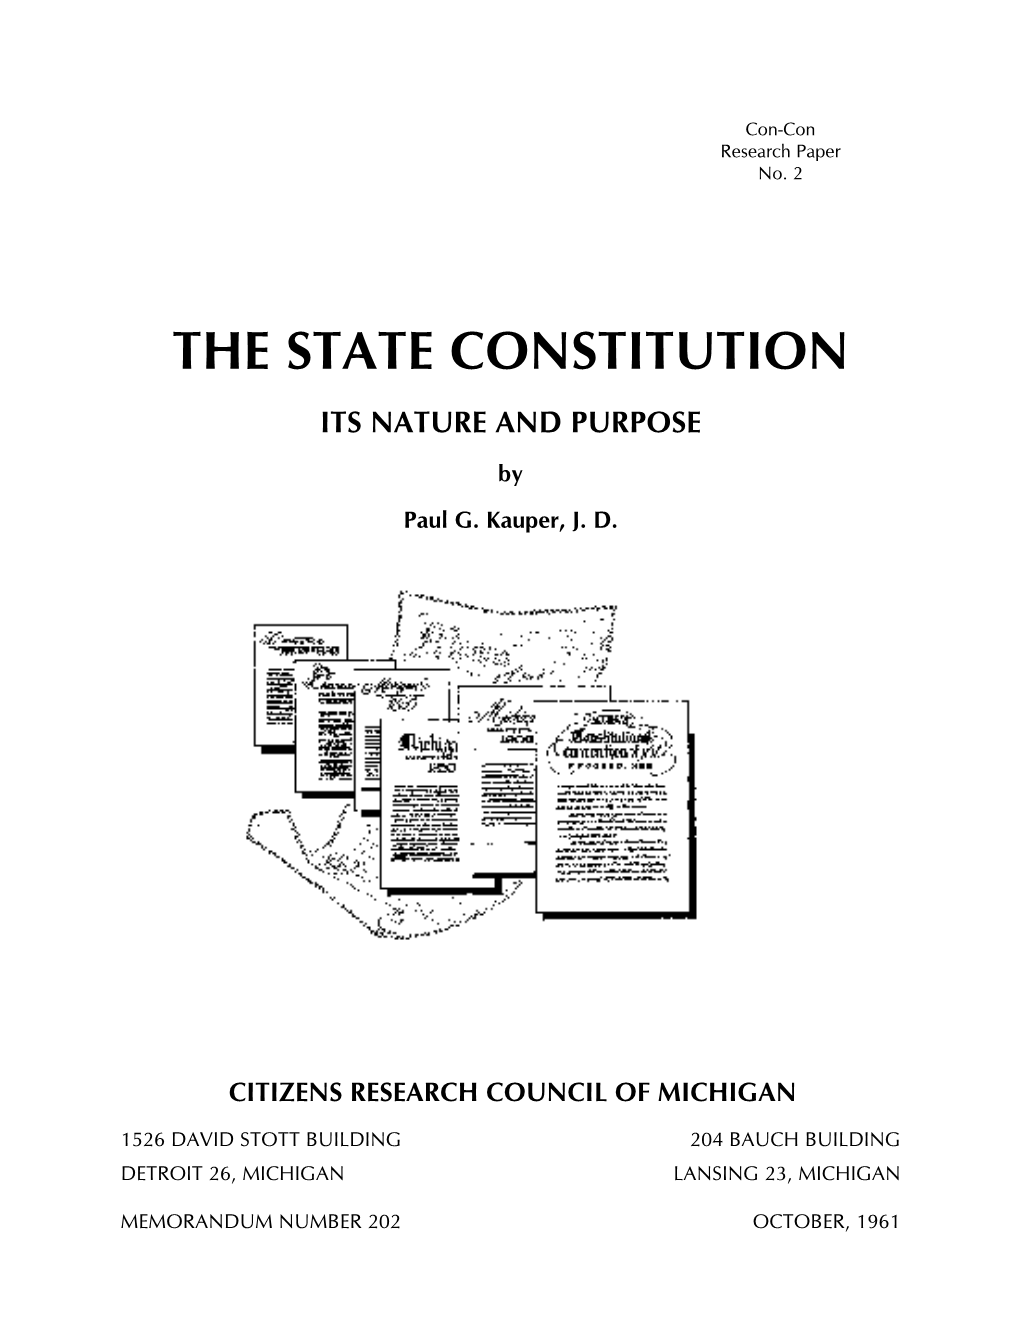 The State Constitution Its Nature and Purpose